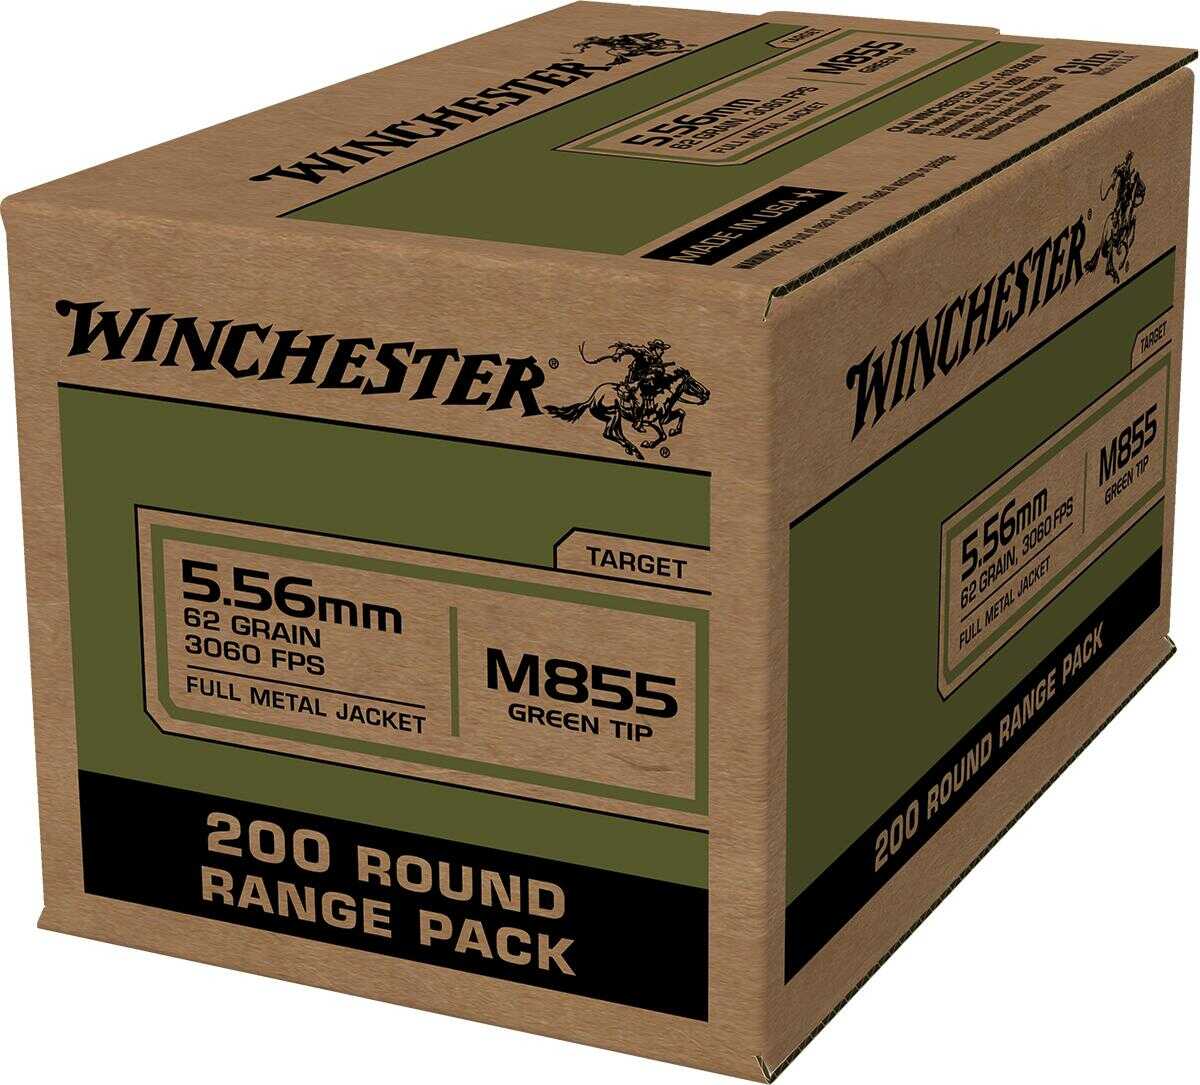 Winchester M855 Green Tip 5.56 NATO 62 gr 3060 fps Full Metal Jacket (FMJ) Ammo 200 Round Box